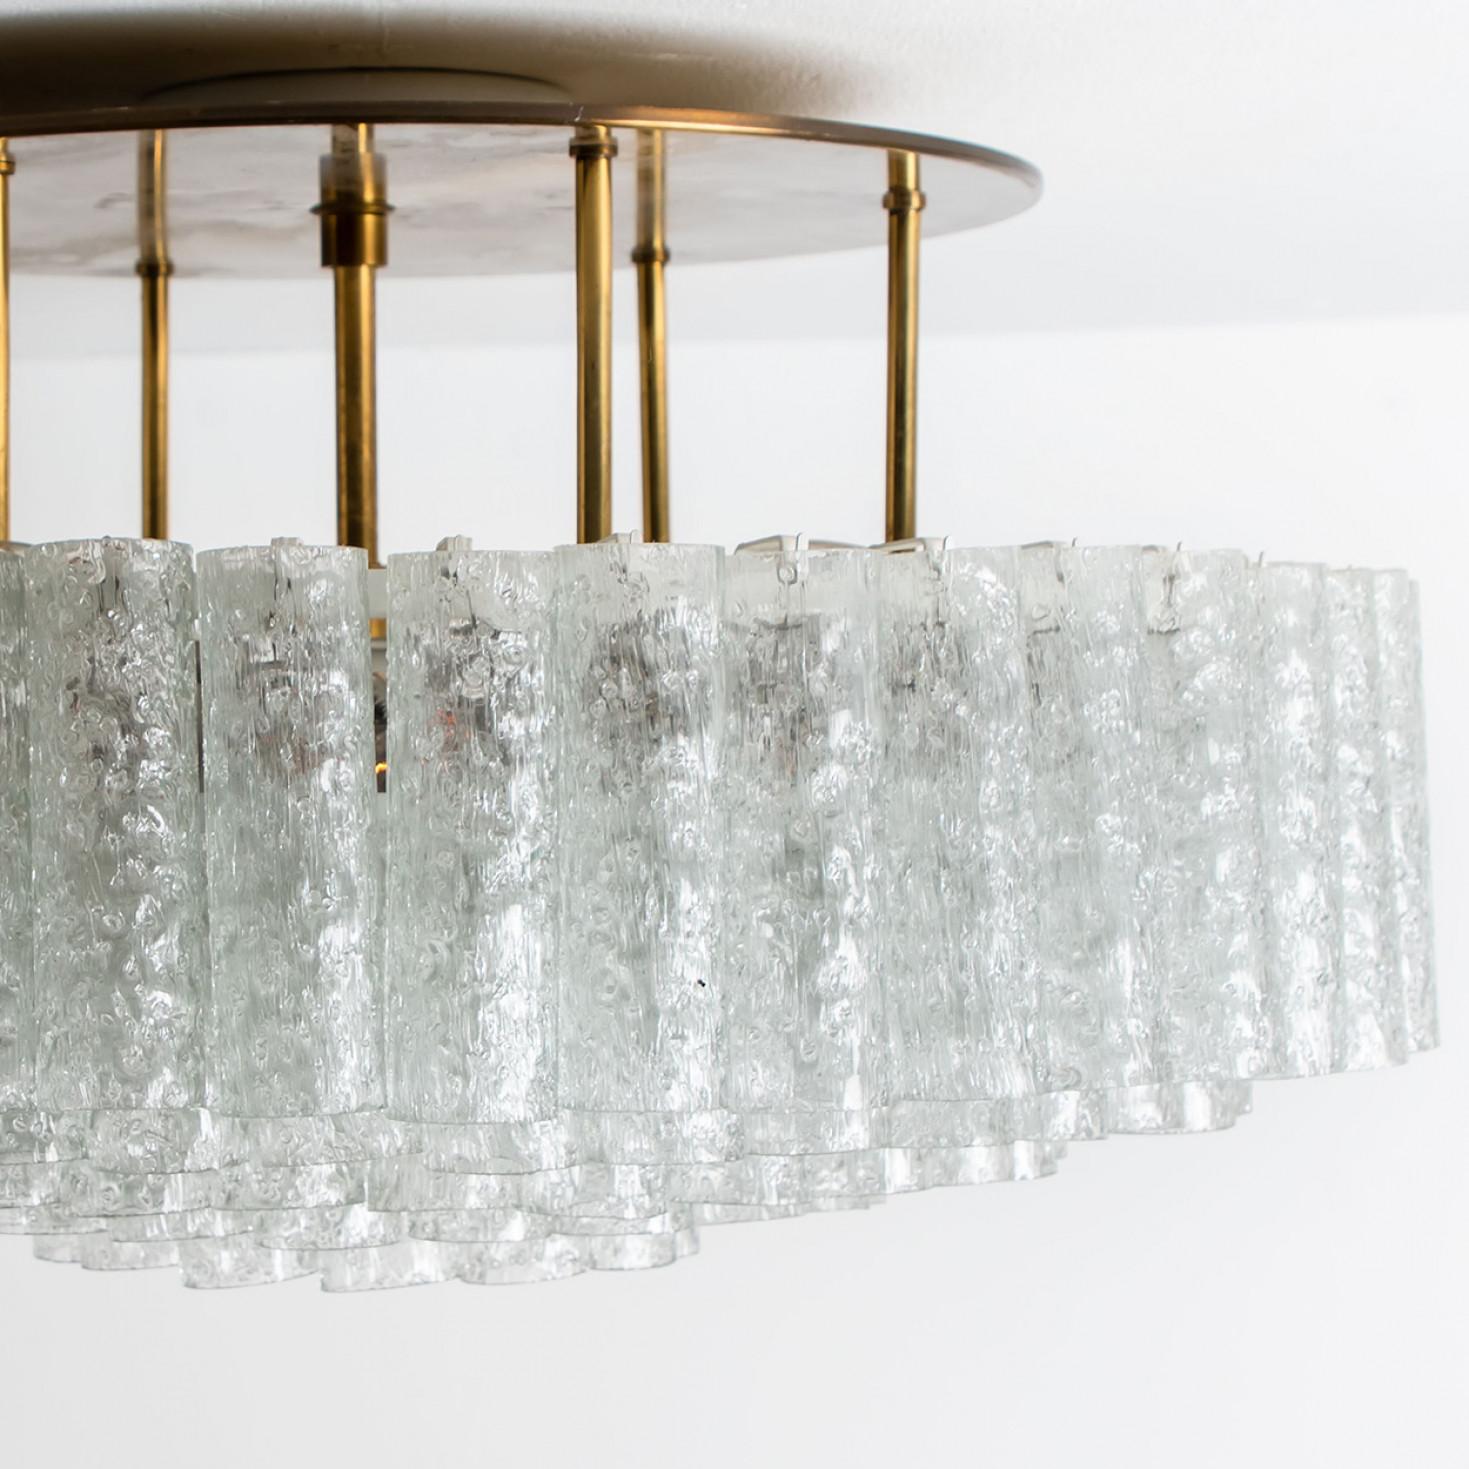 Polished One of the Two Large Blown Glass Brass Flush Mount Light Fixtures by Doria 1960s For Sale